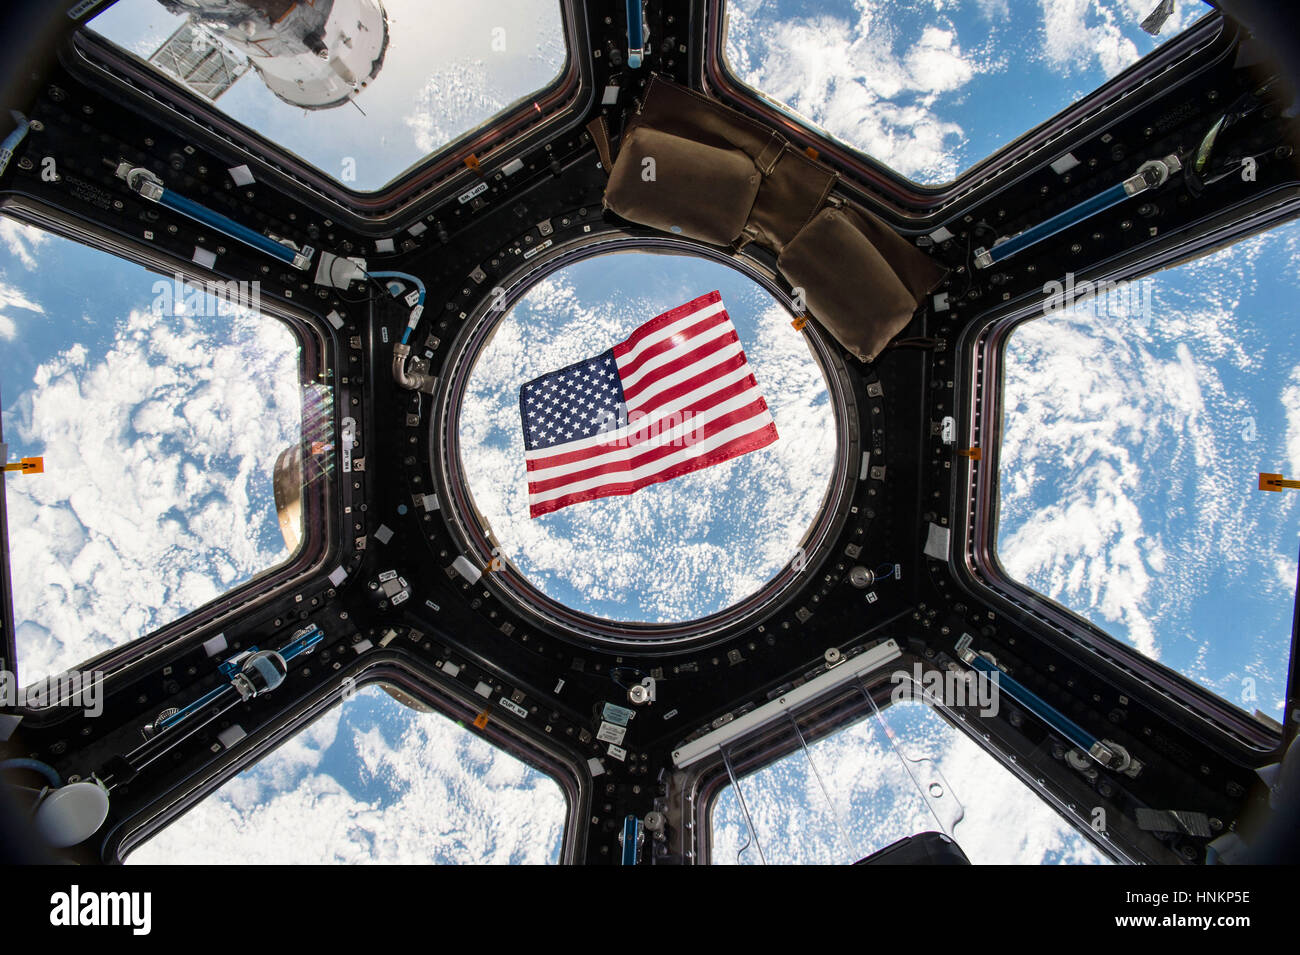 American flag is visible in the windows of the cupola aboard the International Space Station Stock Photo